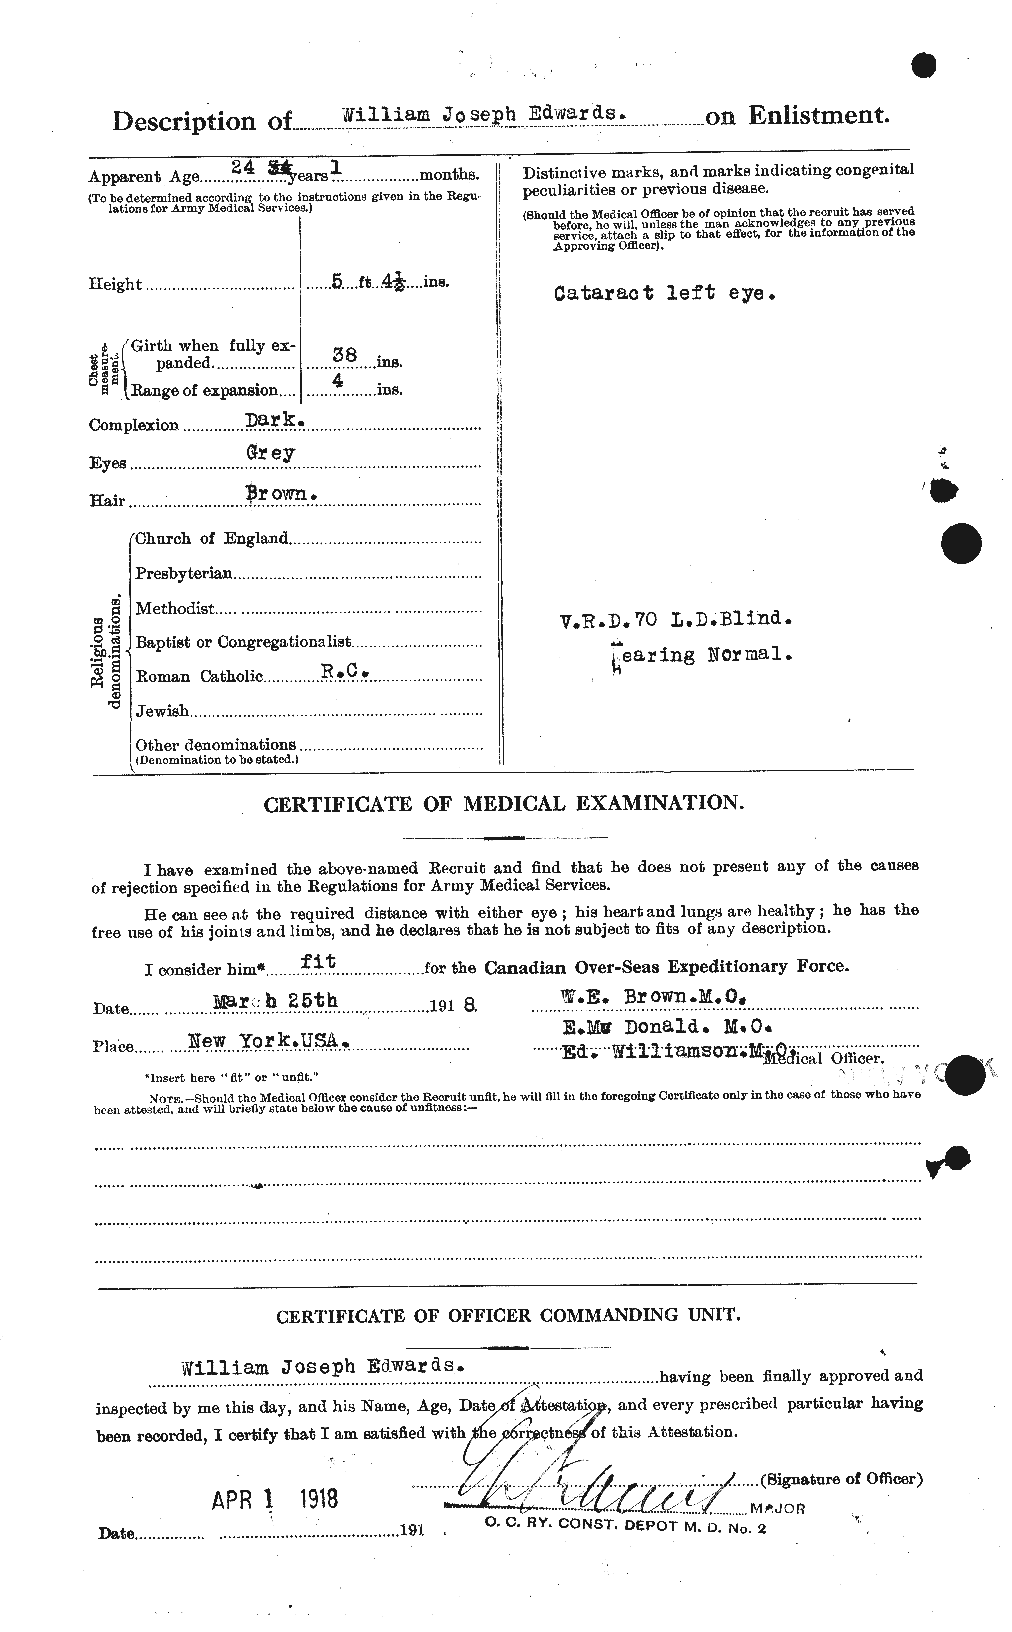 Personnel Records of the First World War - CEF 311928b